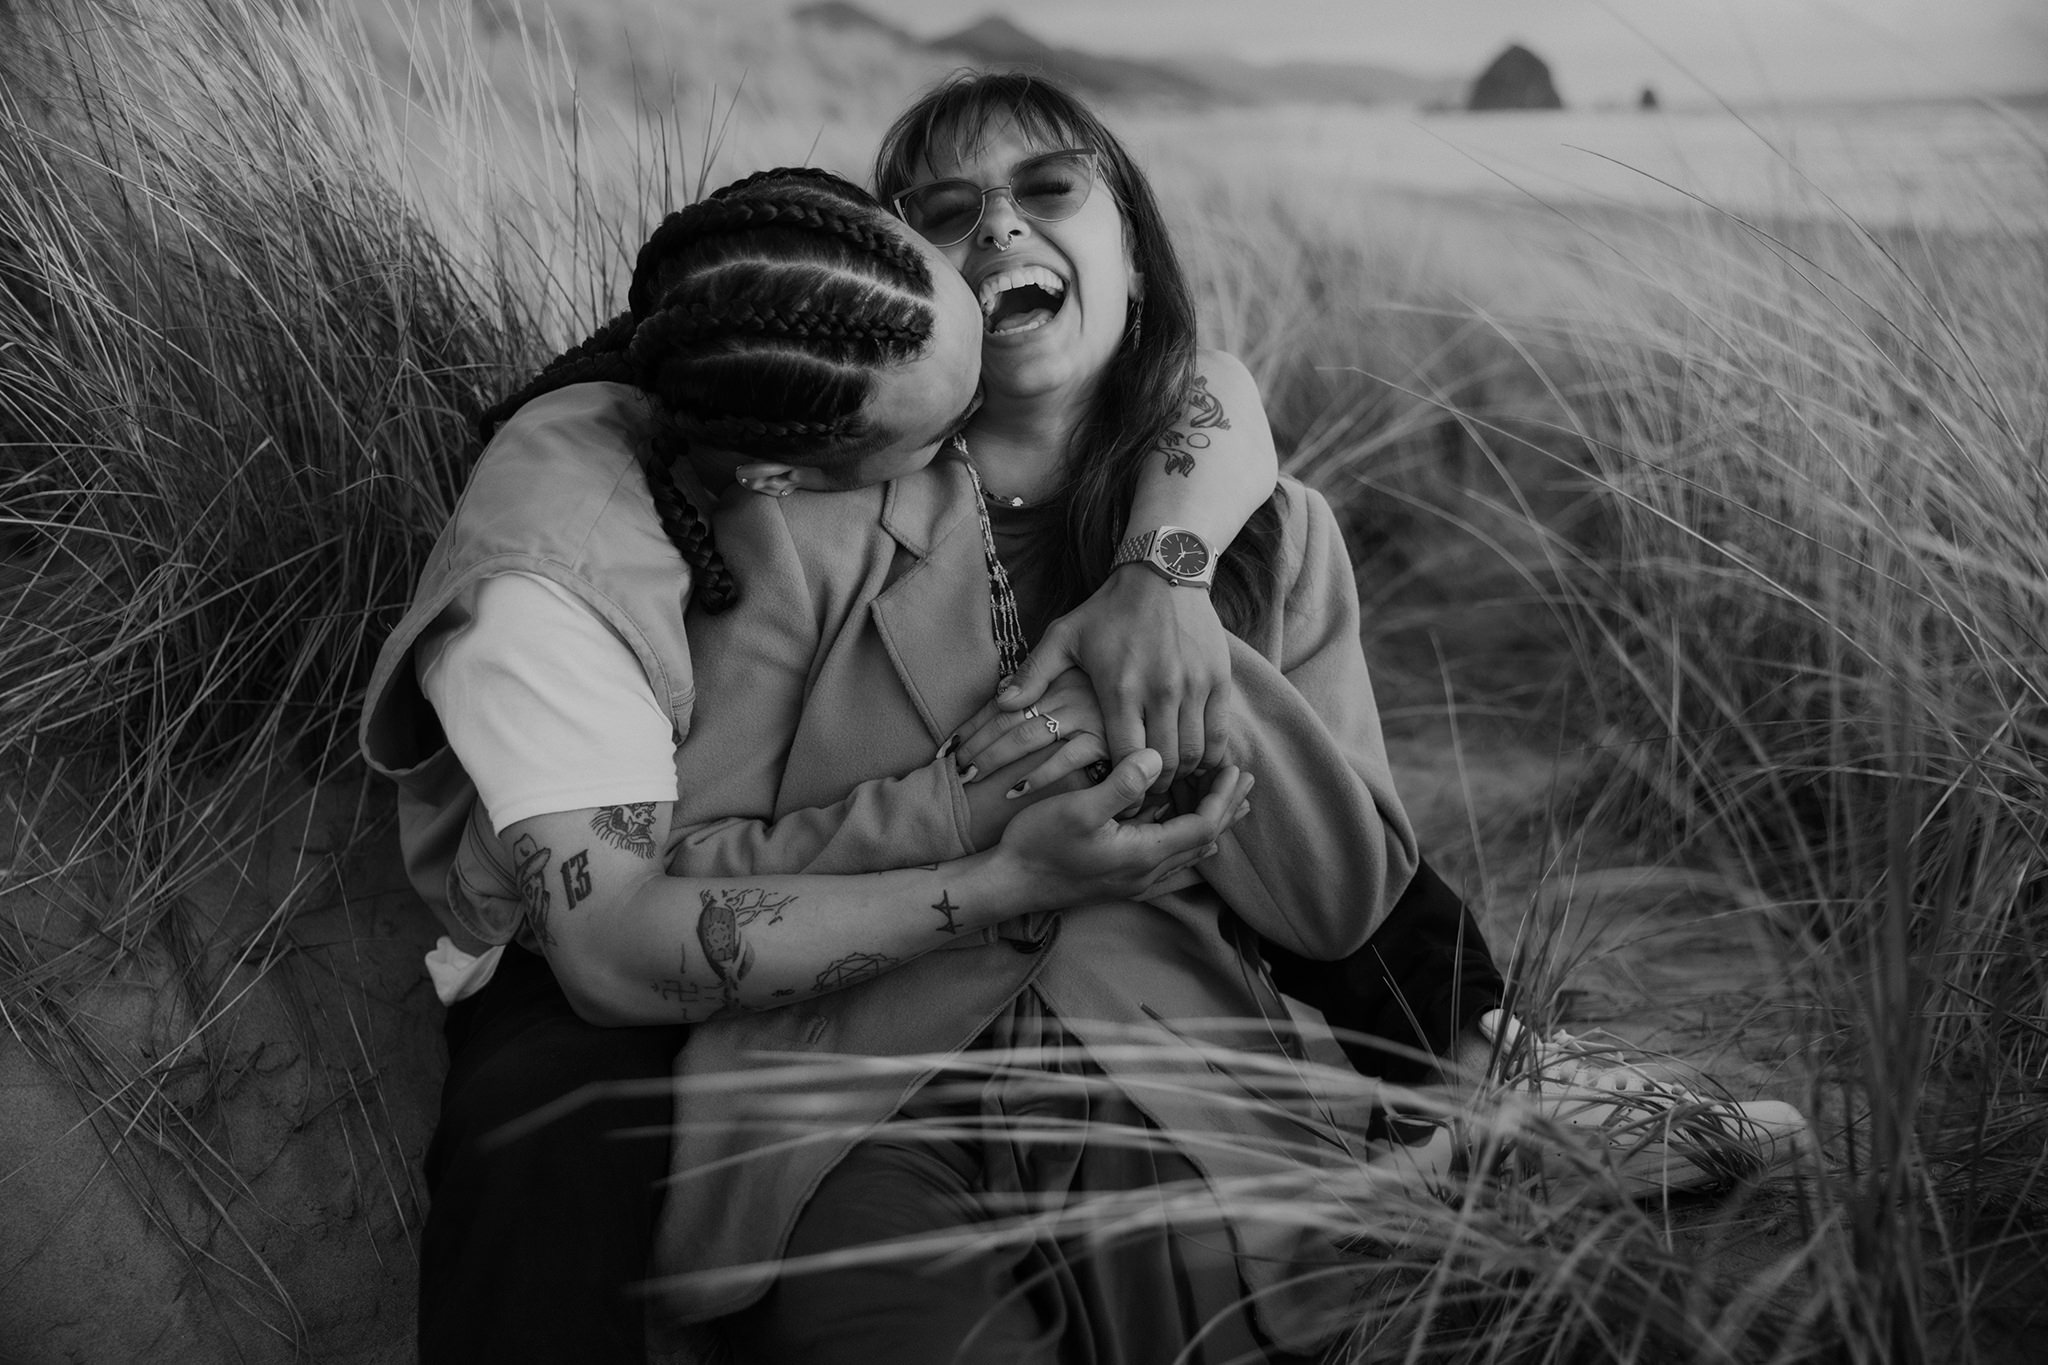 A candid black and white Cannon Beach engagement photo in the sand dunes